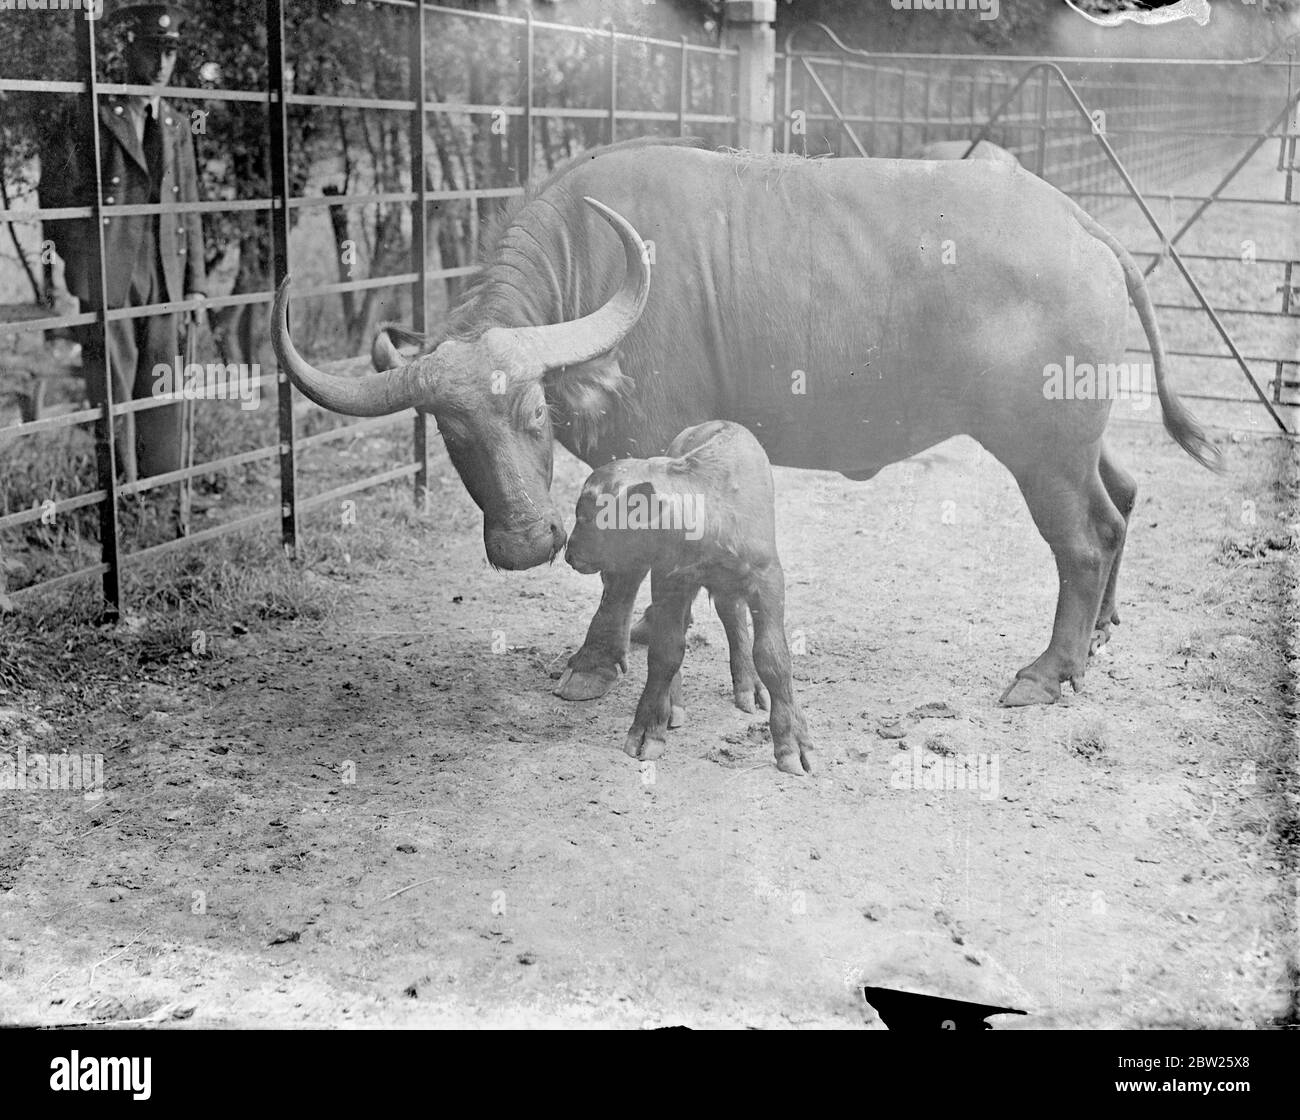 First Cape buffalo born at Whipsnade. In paddock only a few hours after  birth. The first of its species to be born at Whipsnade, a Cape Buffalo  calf, was running about its